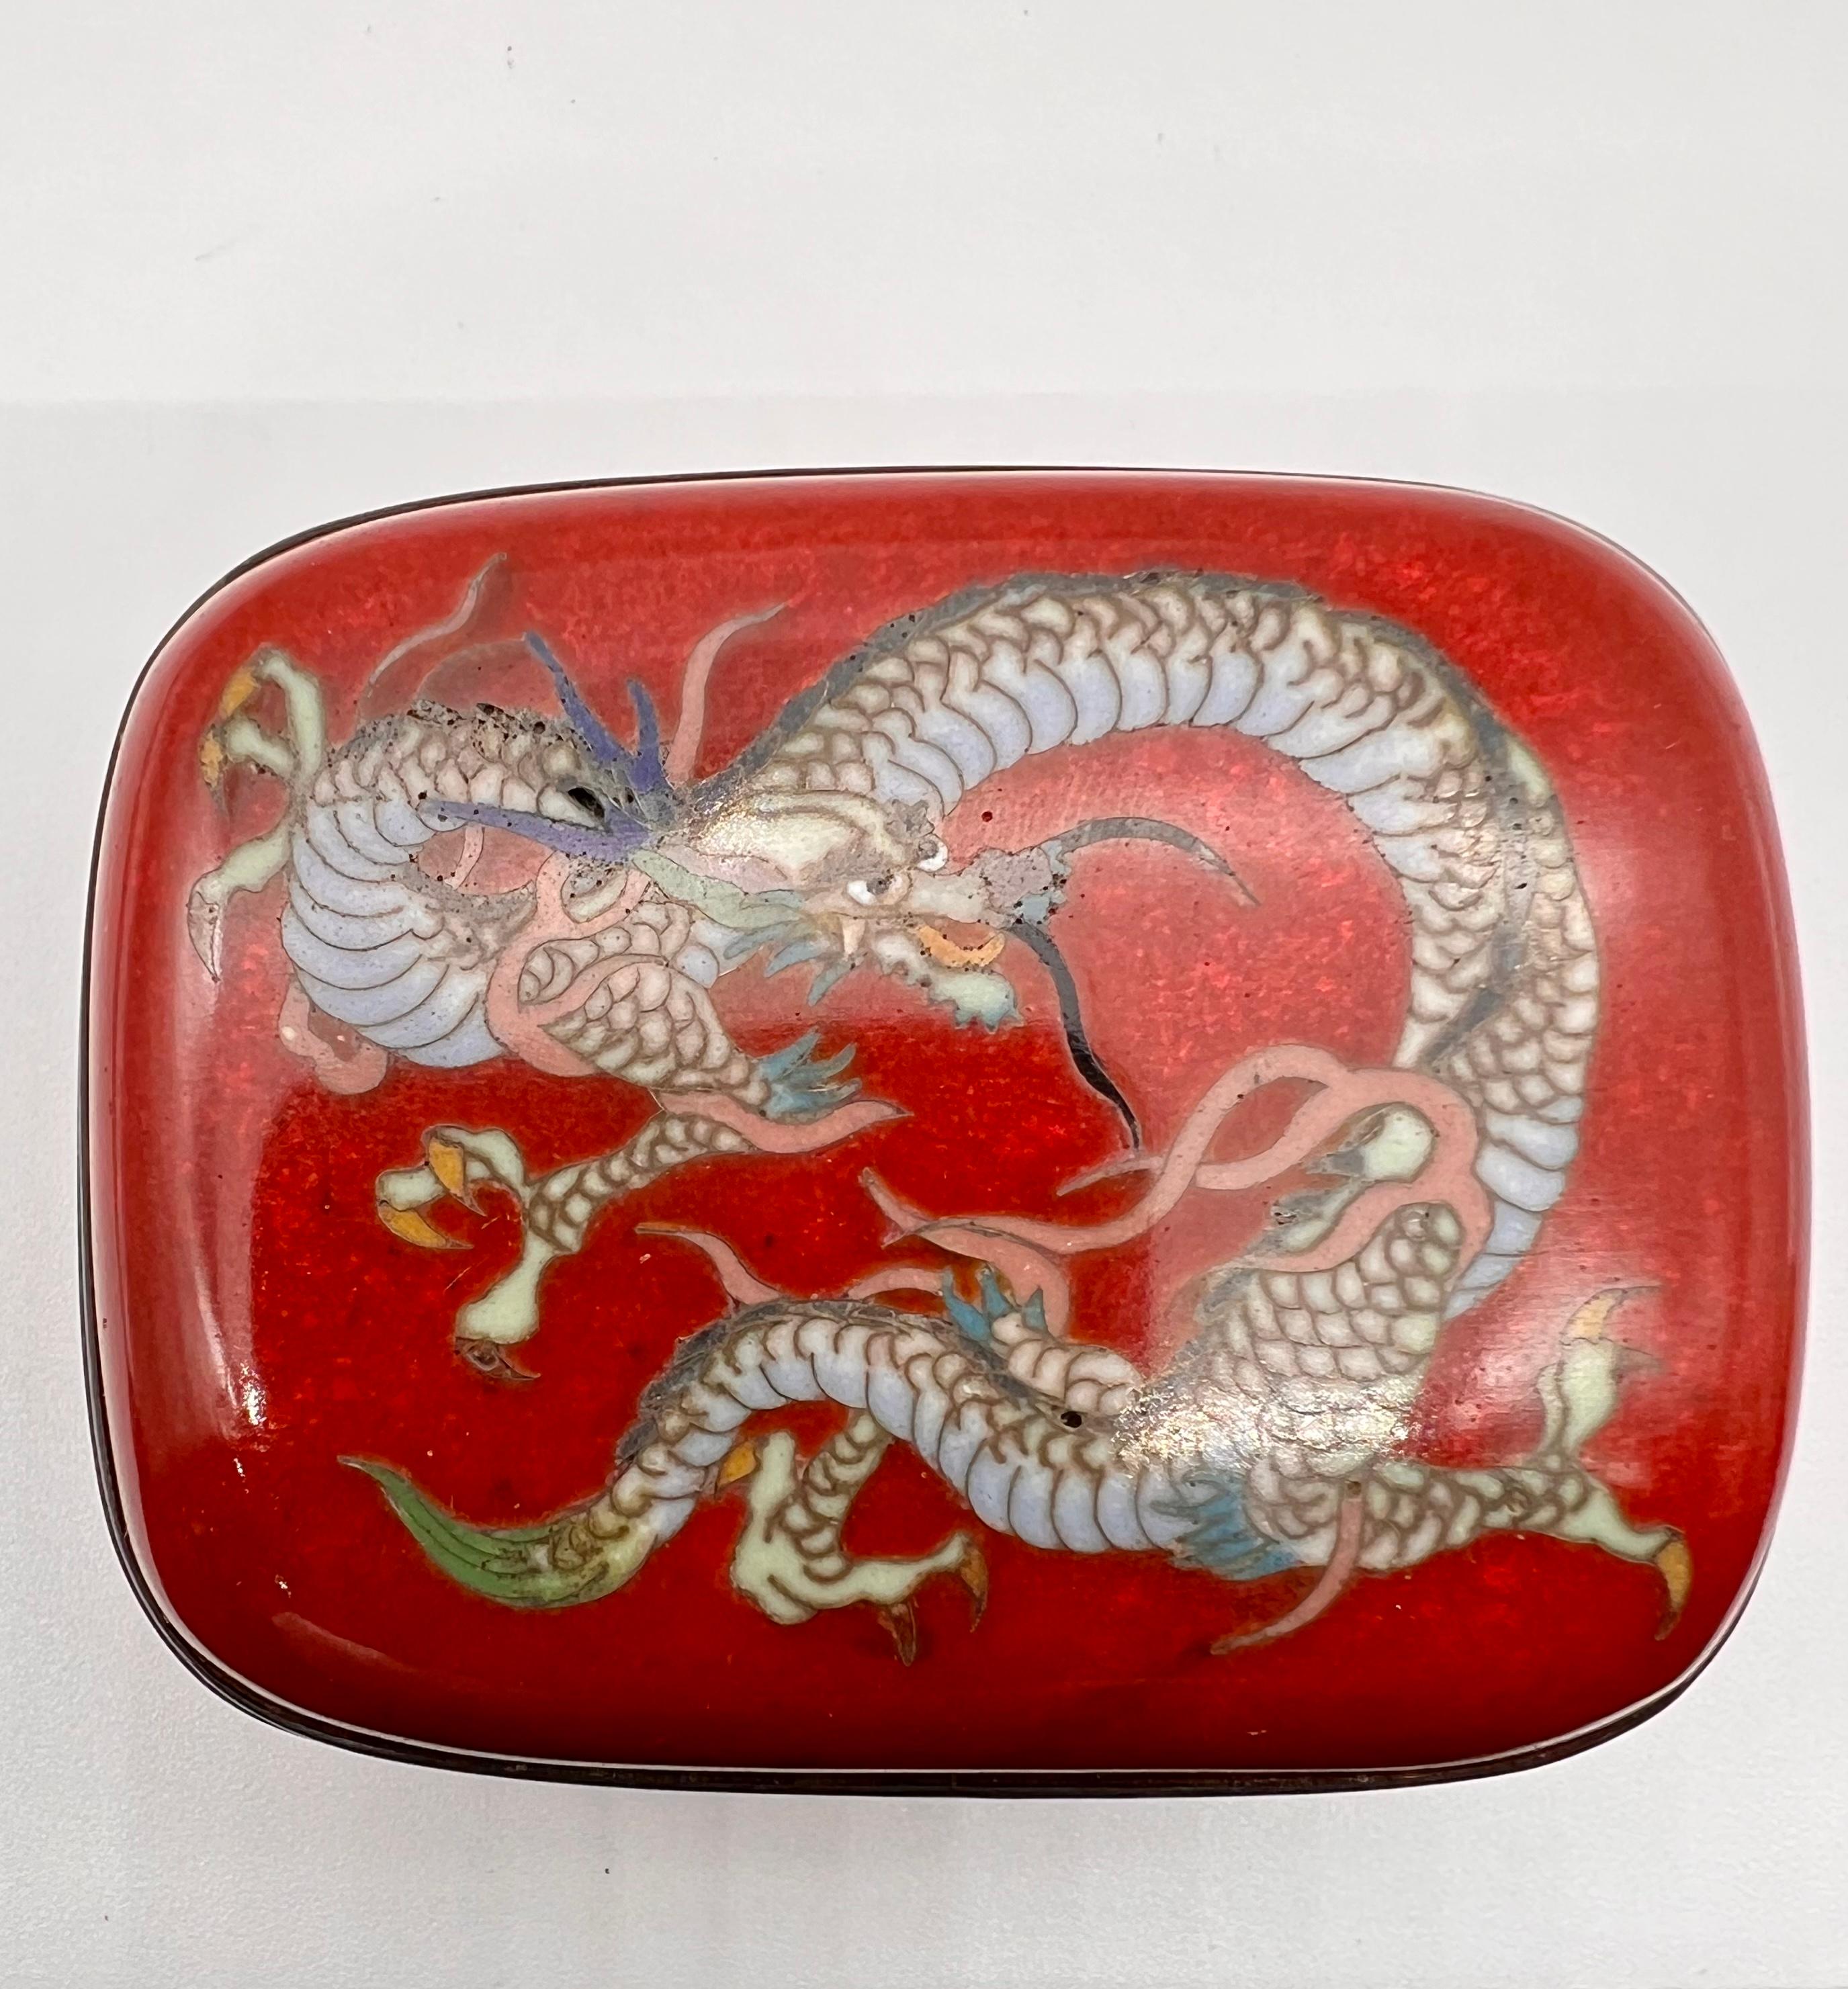 Exquisite Japanese Cloisonne Enamel Box and Cover. 19th C For Sale 6